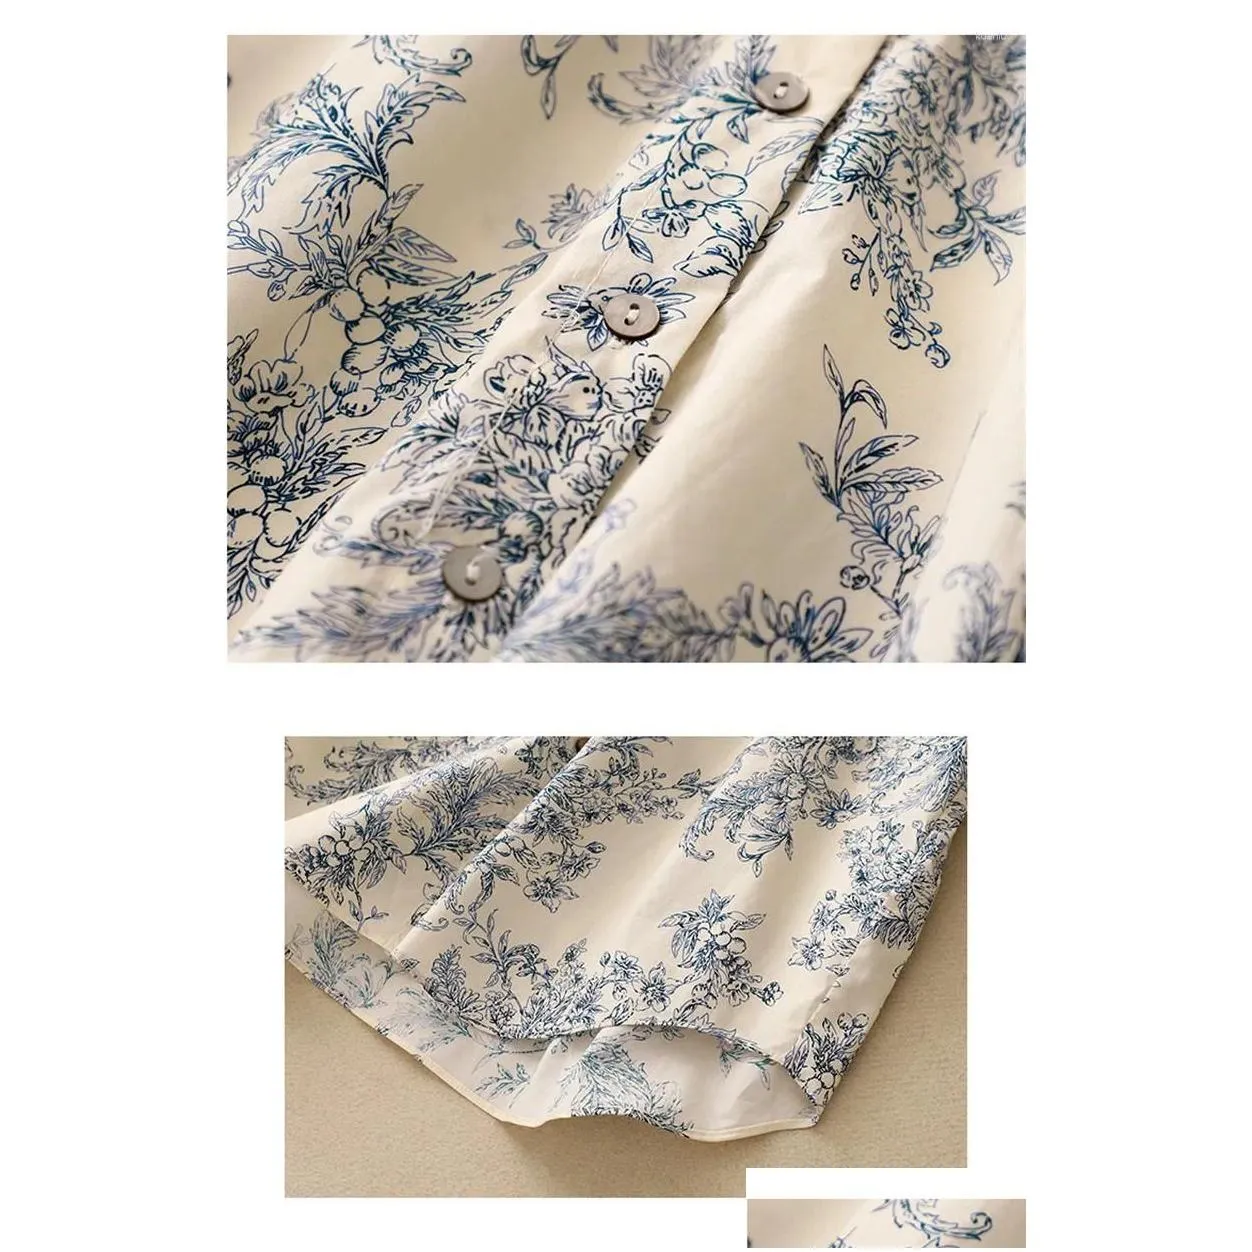 Women`s Blouses Limiguyue Summer Blue And White Porcelain Print Blouse Women Chinese Style O-Neck Long Sleeve Cotton Shirts Causal Tops